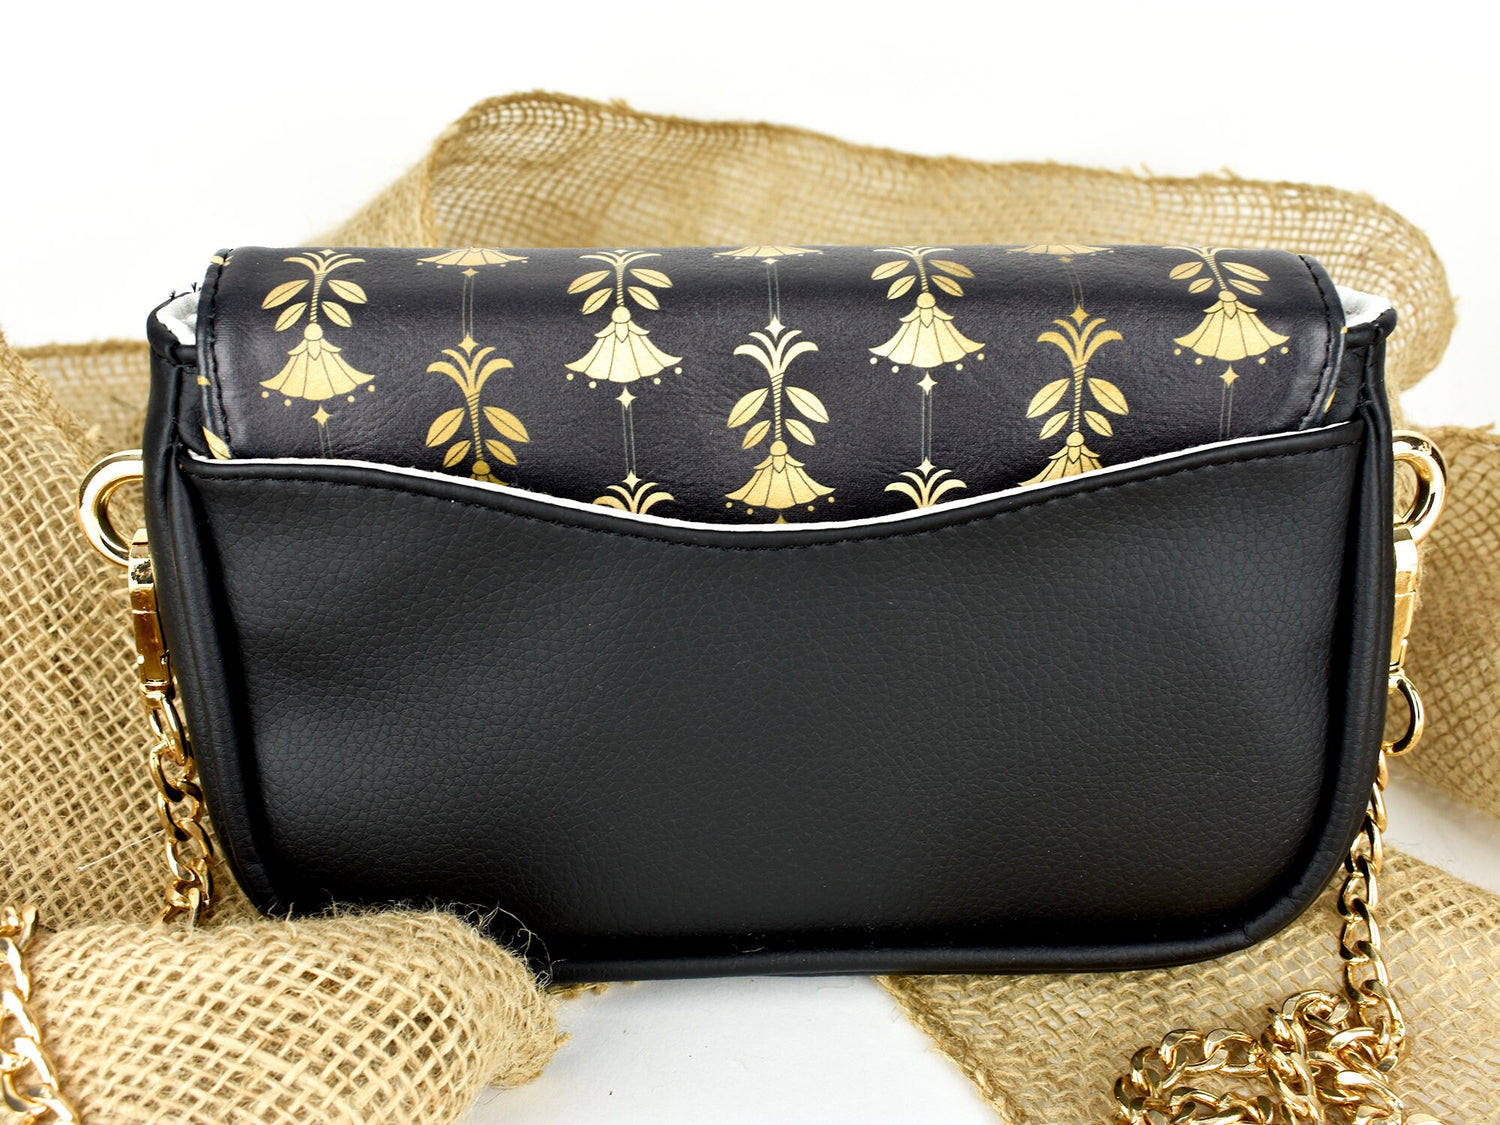 Buy Elegant Leather Black Purse Shoulder Handbag For Women Online In India  At Discounted Prices